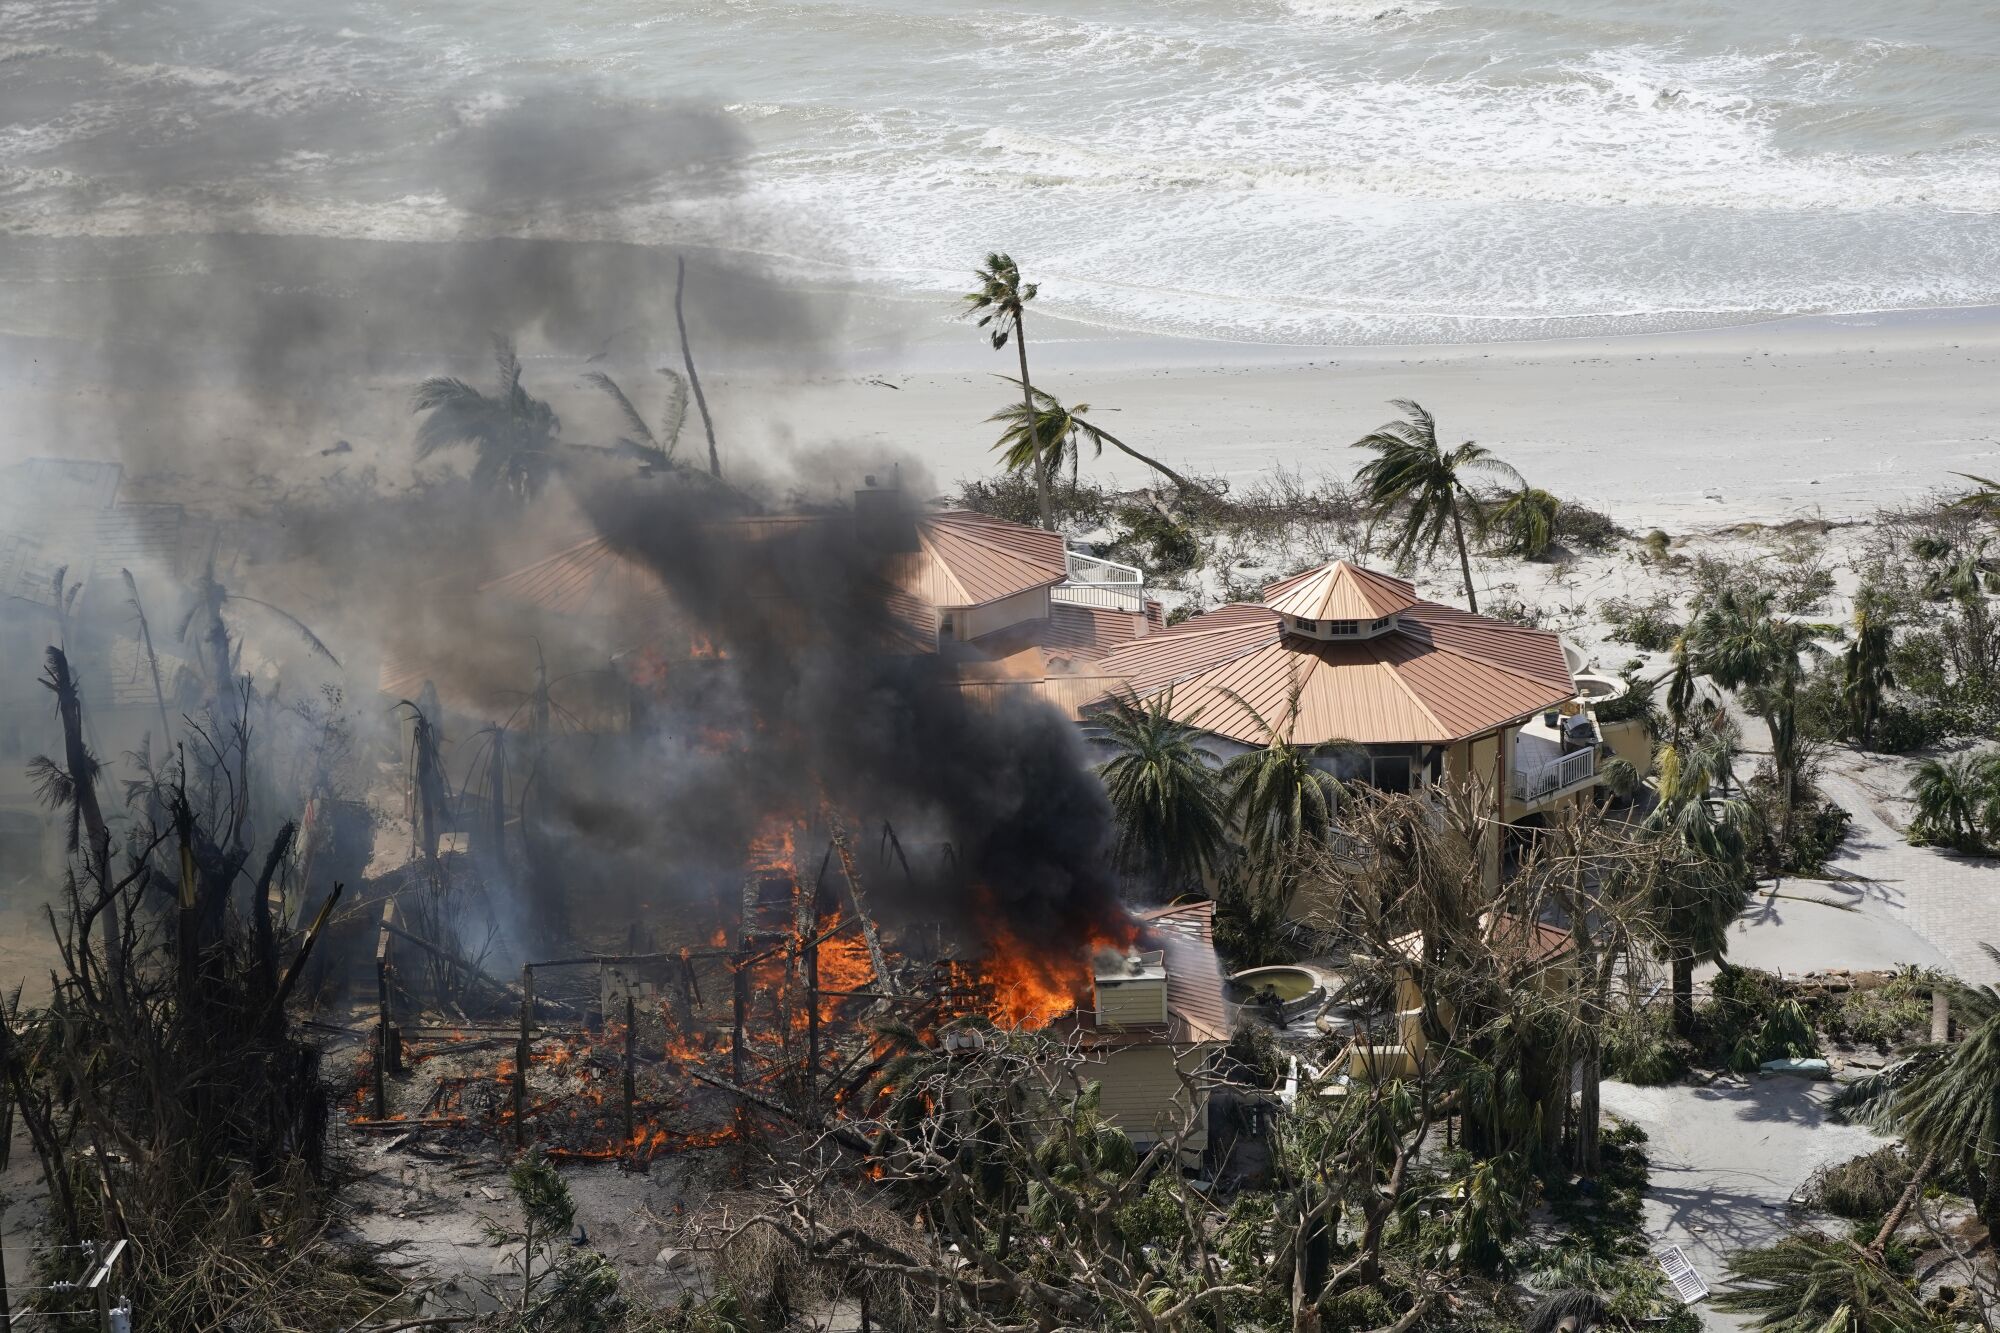 A structure burns by a beach.